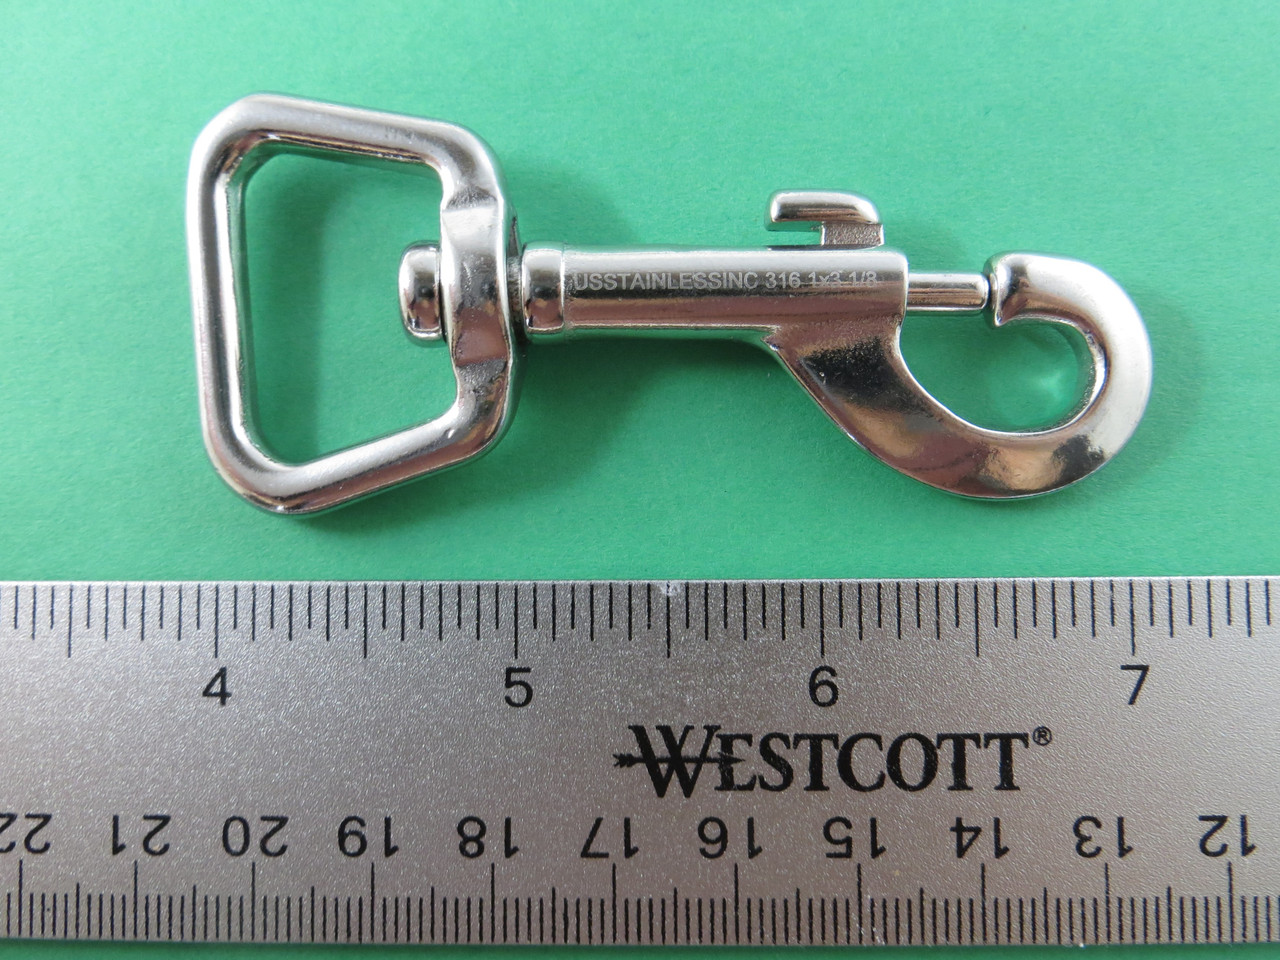 Stainless Steel 316 1 x 3 1/8 Bolt Snap Square Swivel End Marine